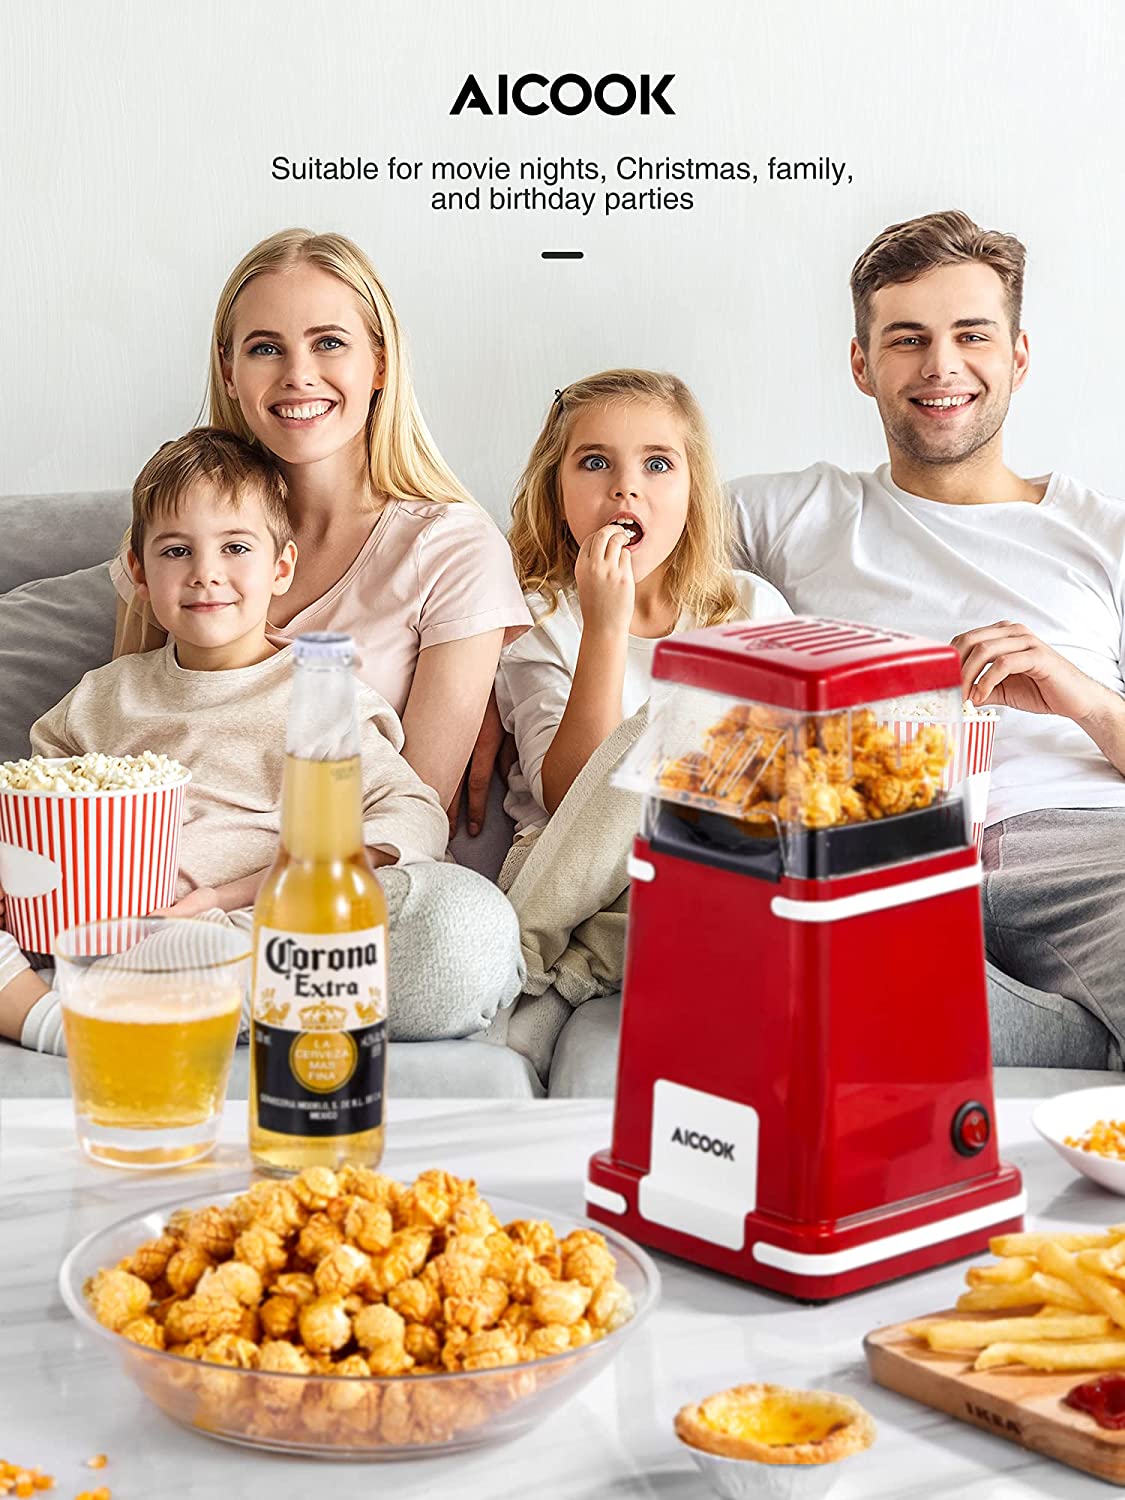 AICOOK | Popcorn Maker, Hot Air Retro Popcorn Popper with Measuring Cup, Electric Home 1200W Popcorn Machine for Birthday Party, Christmas, Movie Nights, ETL Certified & BPA Free, Nice Family Gift